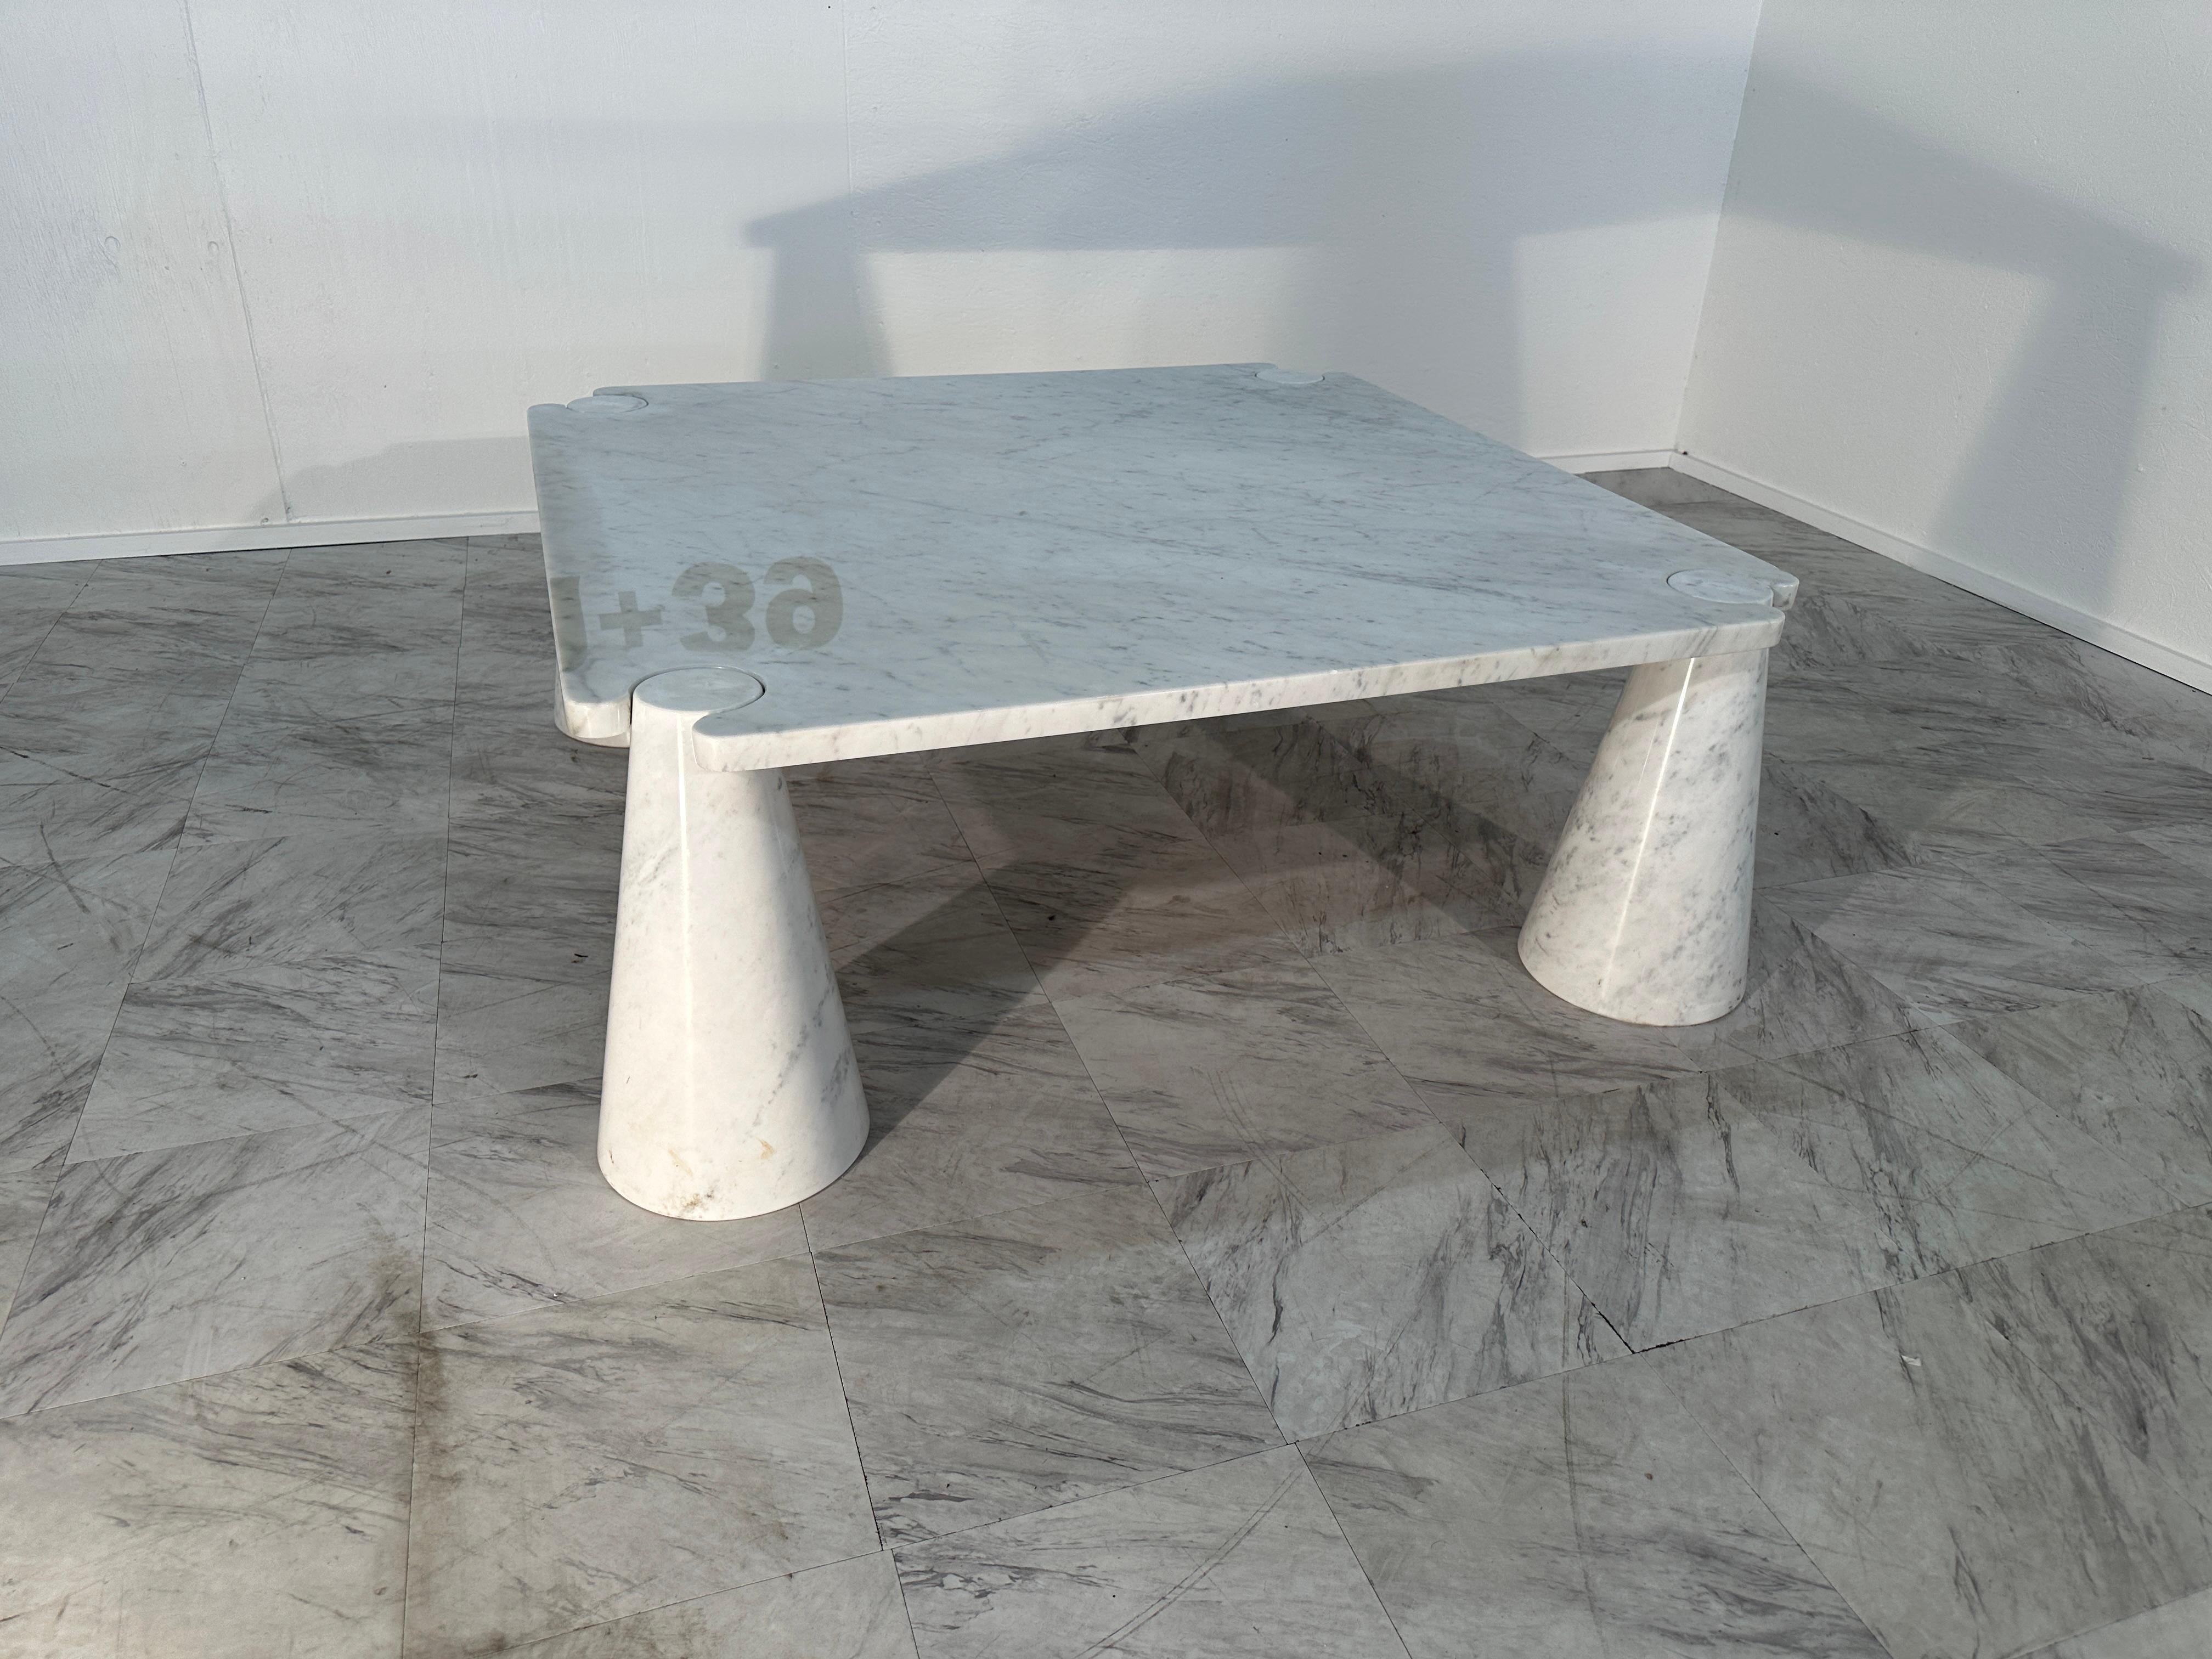 The Mangiarotti 'Eros' Square Marble Coffee Table from Italy in the 1970s is a striking and iconic piece of furniture. Designed by Angelo Mangiarotti, a prominent Italian architect and designer, the table is characterized by its square shape and